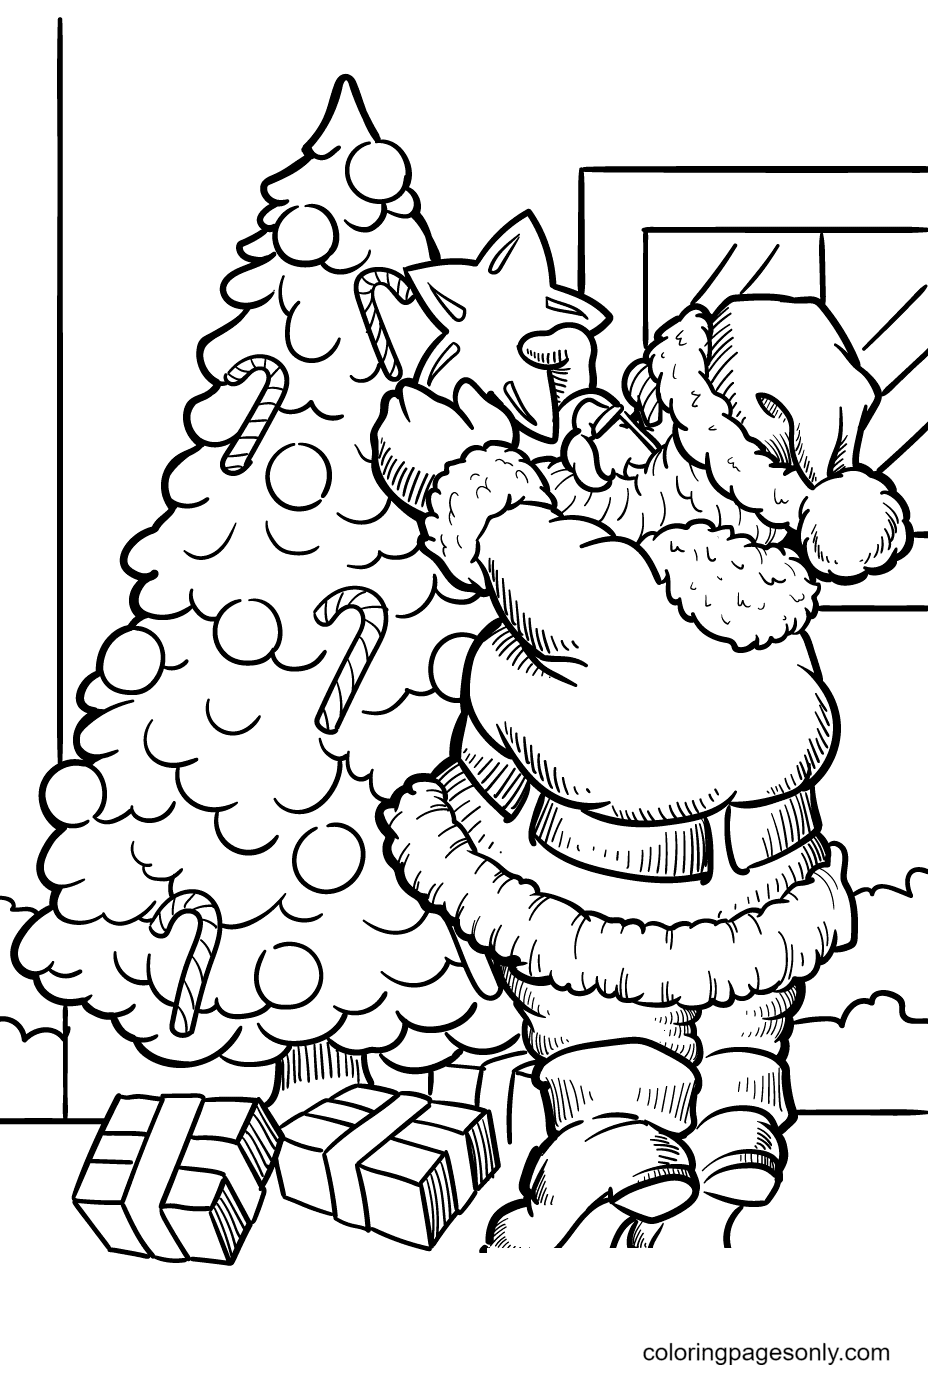 Santa Put a Big Star on Top of the Christmas Tree Coloring Page